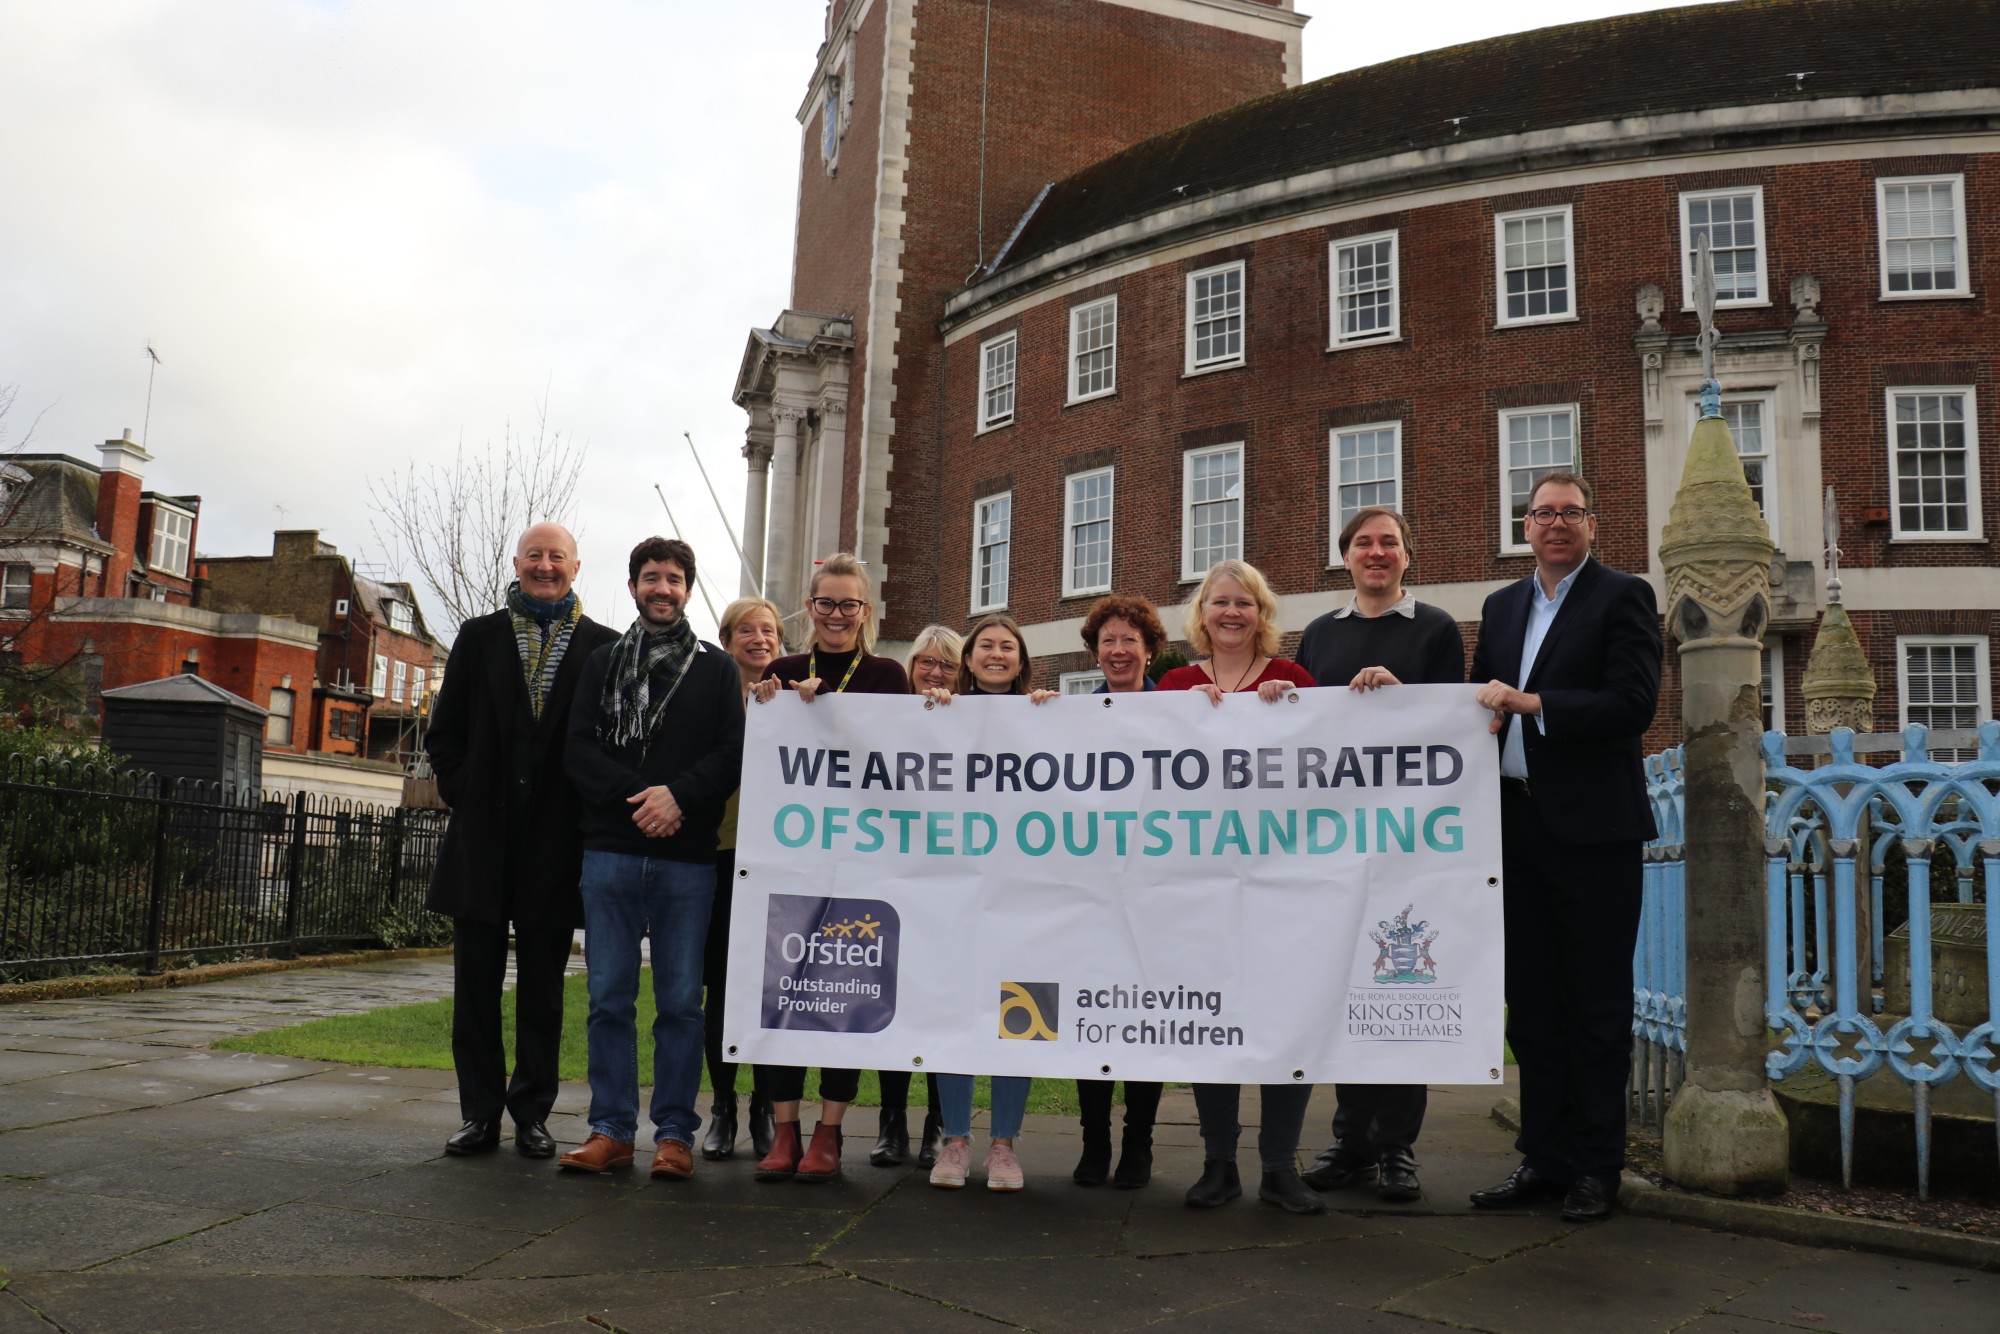 Kingston Council’s children’s services awarded “outstanding” by Ofsted